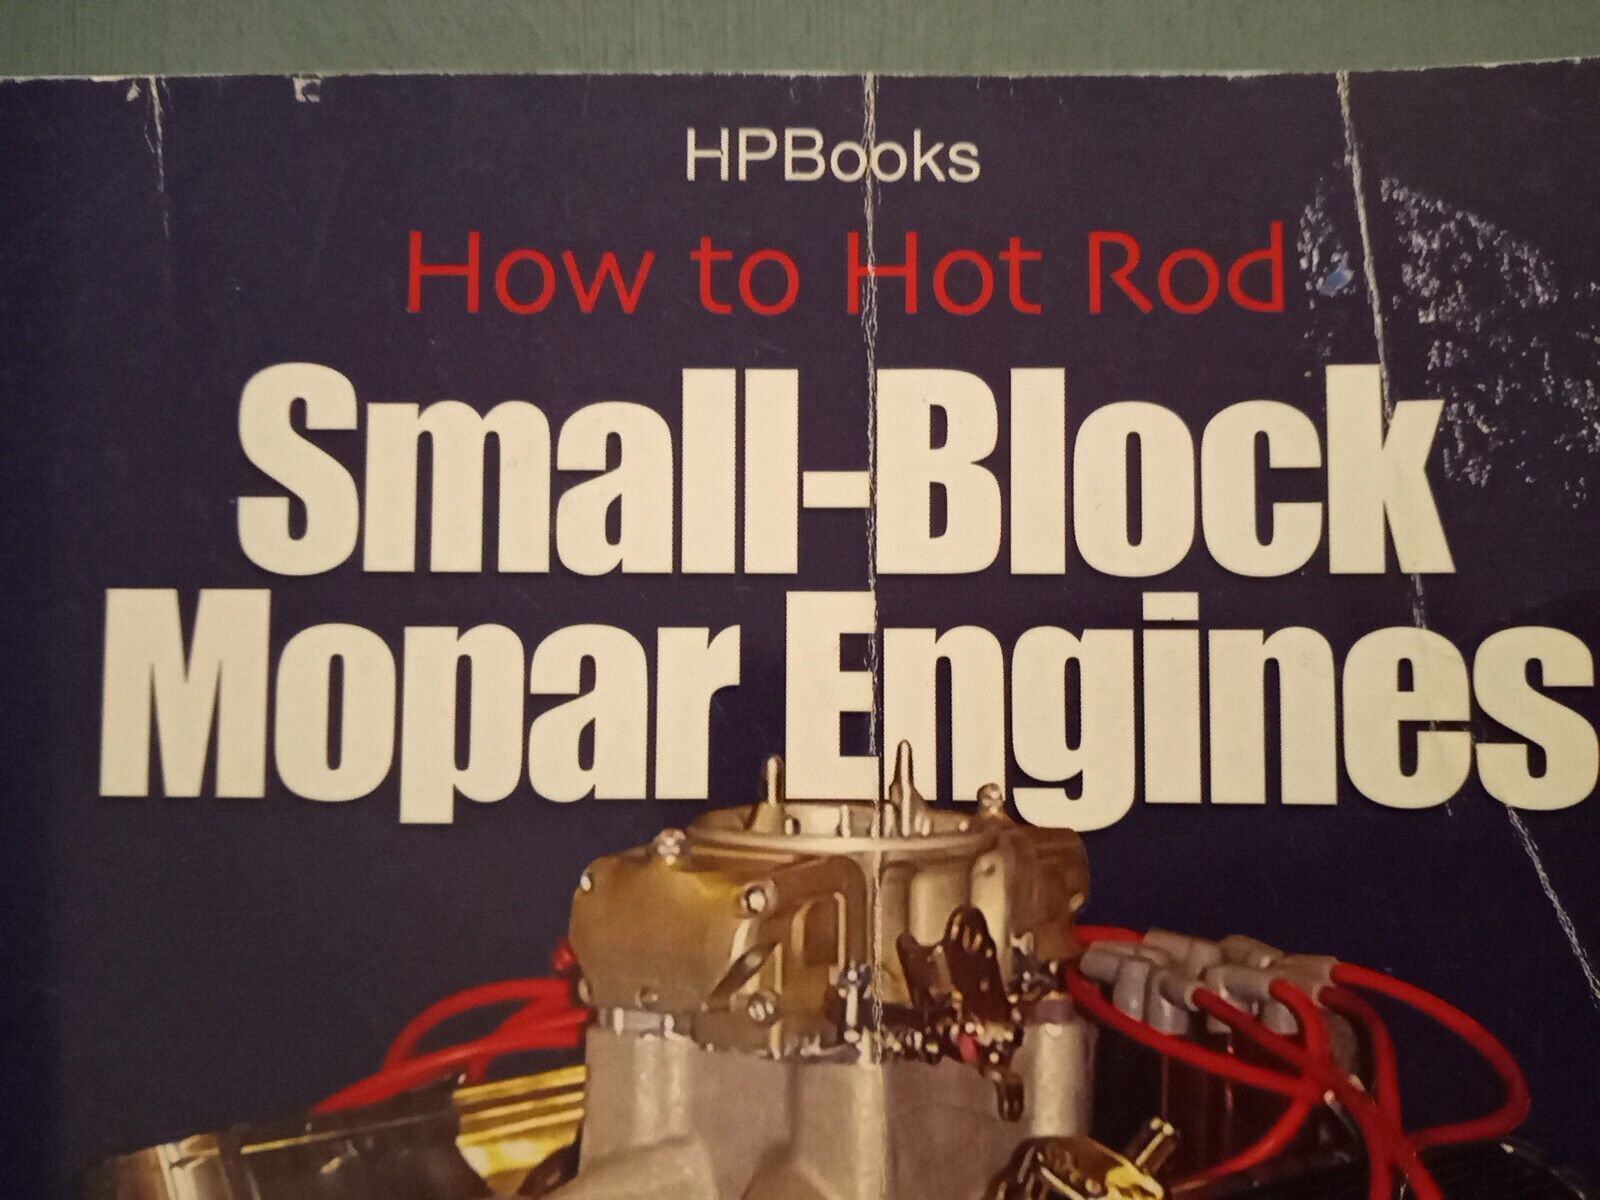 How to Hot Rod Small Block Mopar Engines COVERS ALL MOPARR A ENGINES 1964-1992